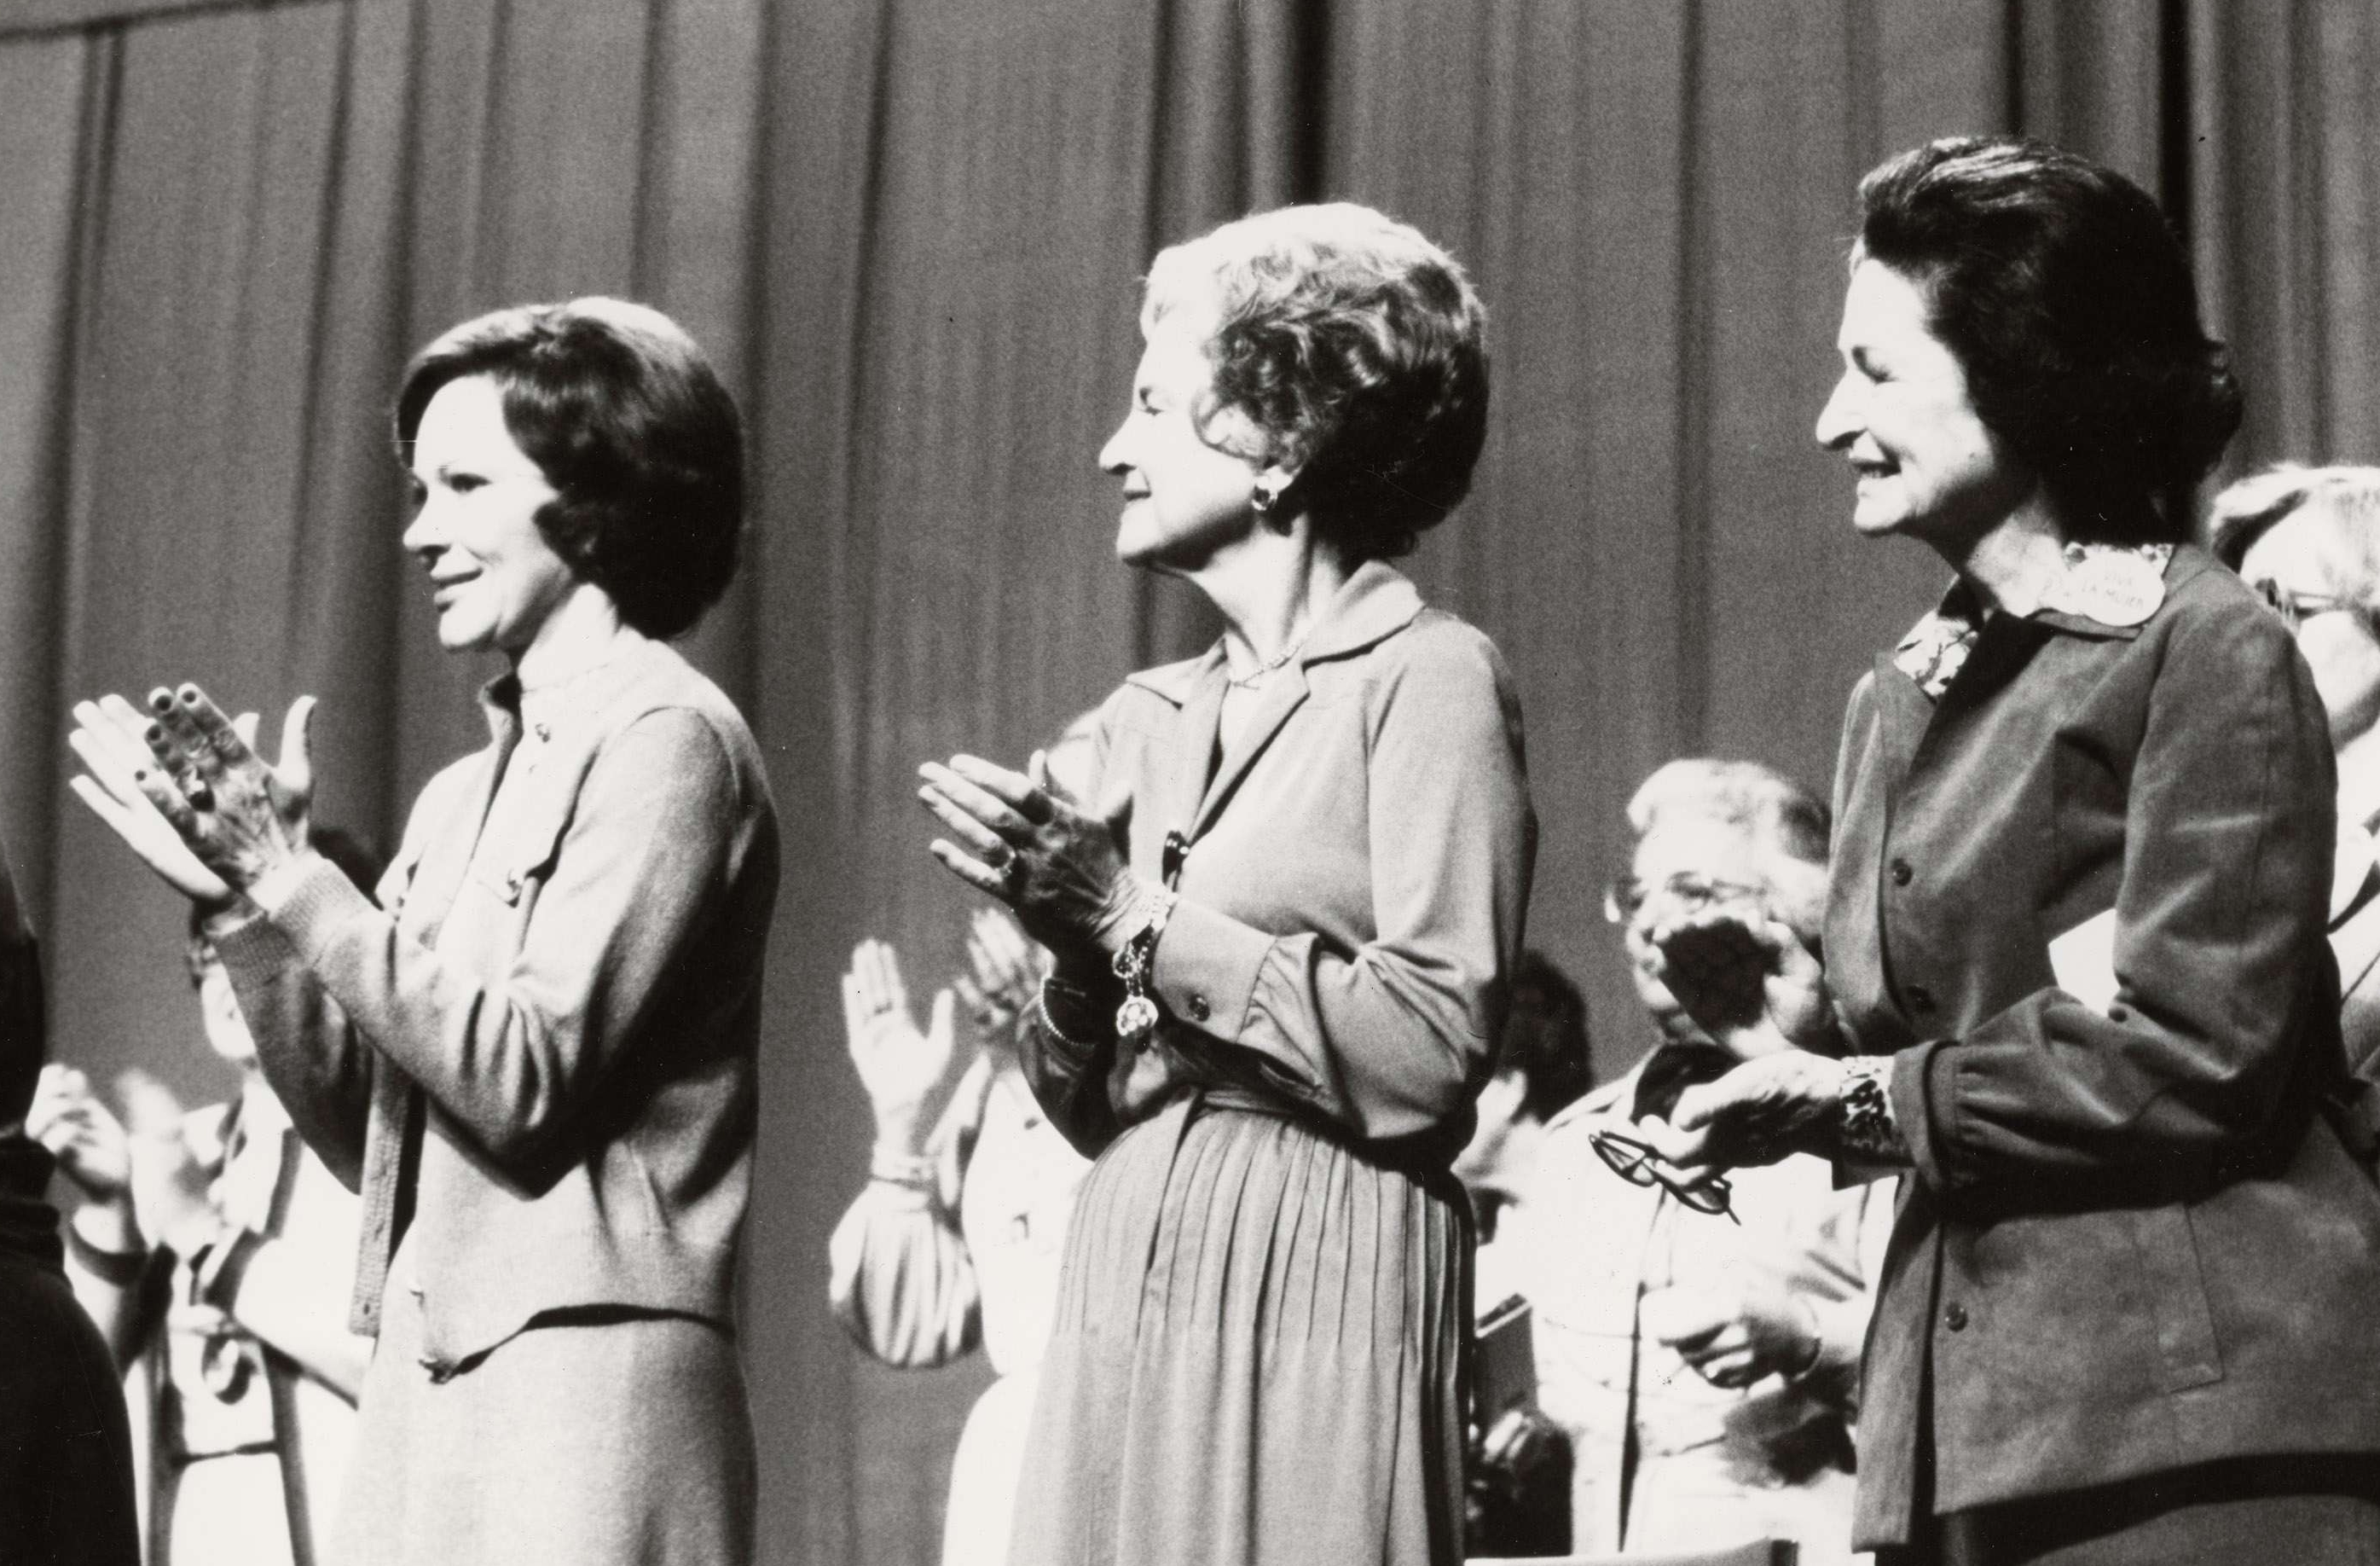 First Ladies Rosalynn Carter, Betty Ford, and Lady Bird Johnson